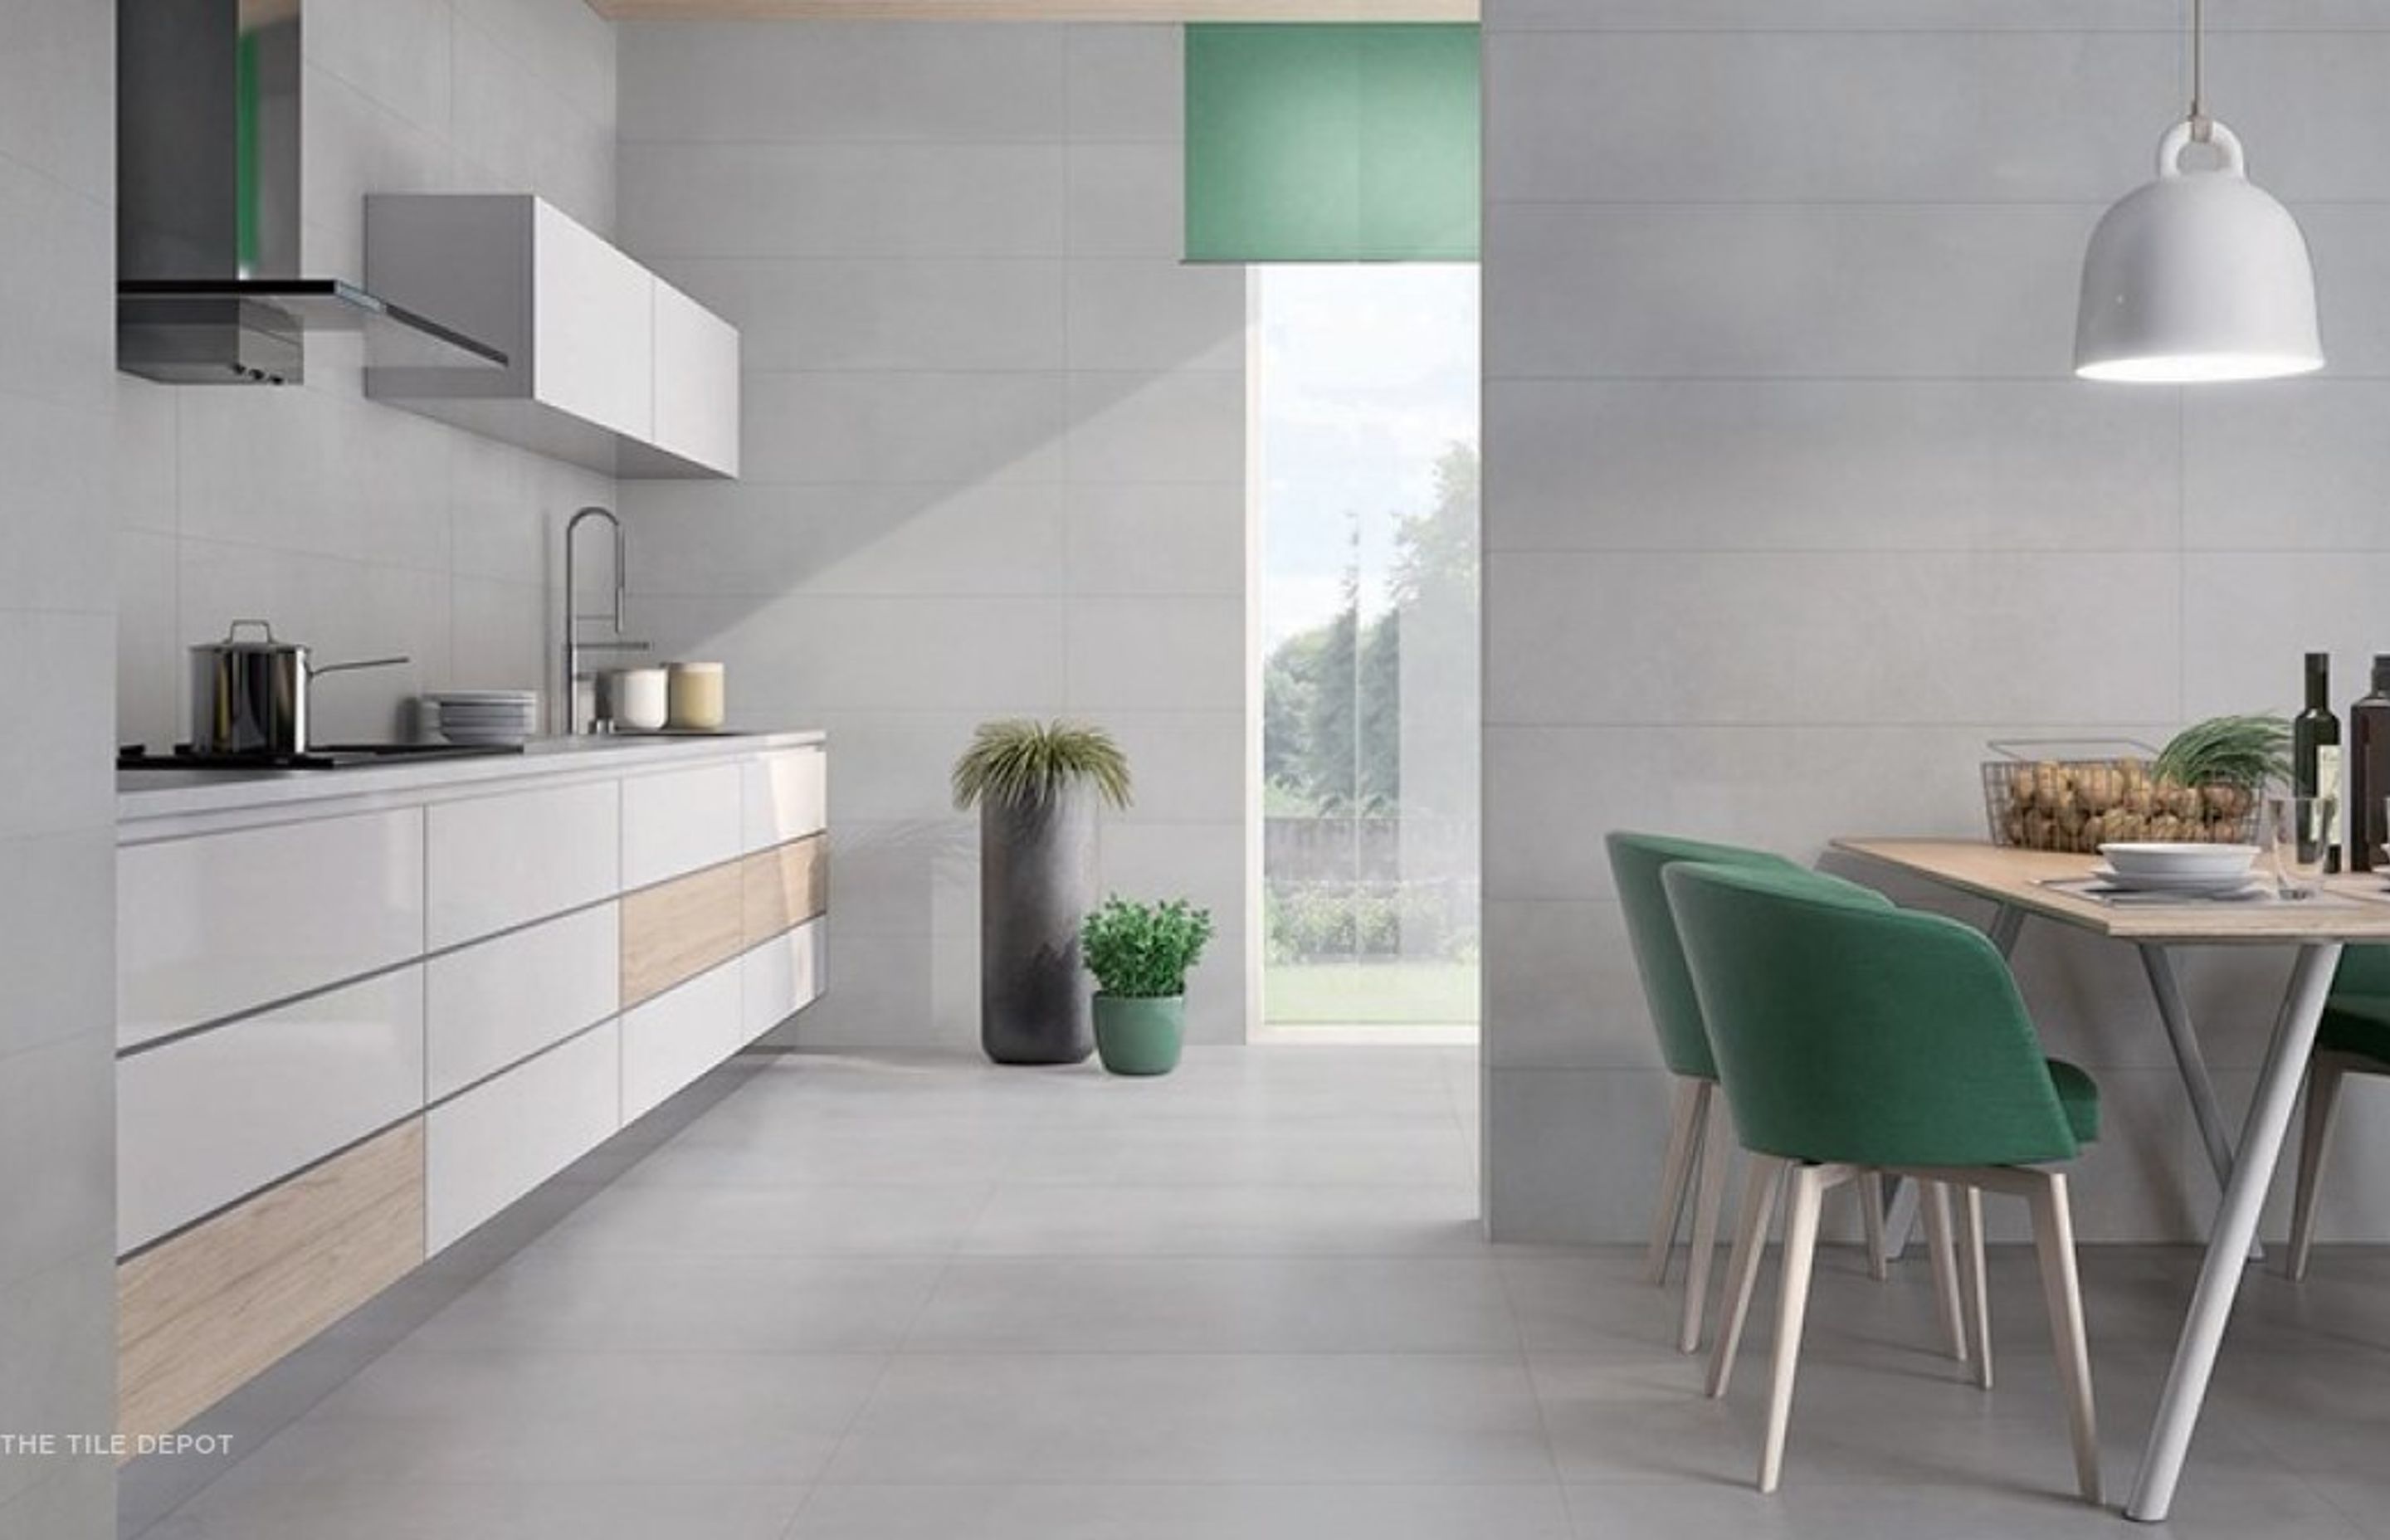 The same glazed porcelain tiles are used in the kitchen as well as the dining area which makes the design more cohesive.  These porcelain tiles have a matte stone look which makes gives the space an Urban contemporary look. (Tile Depot, 2021)